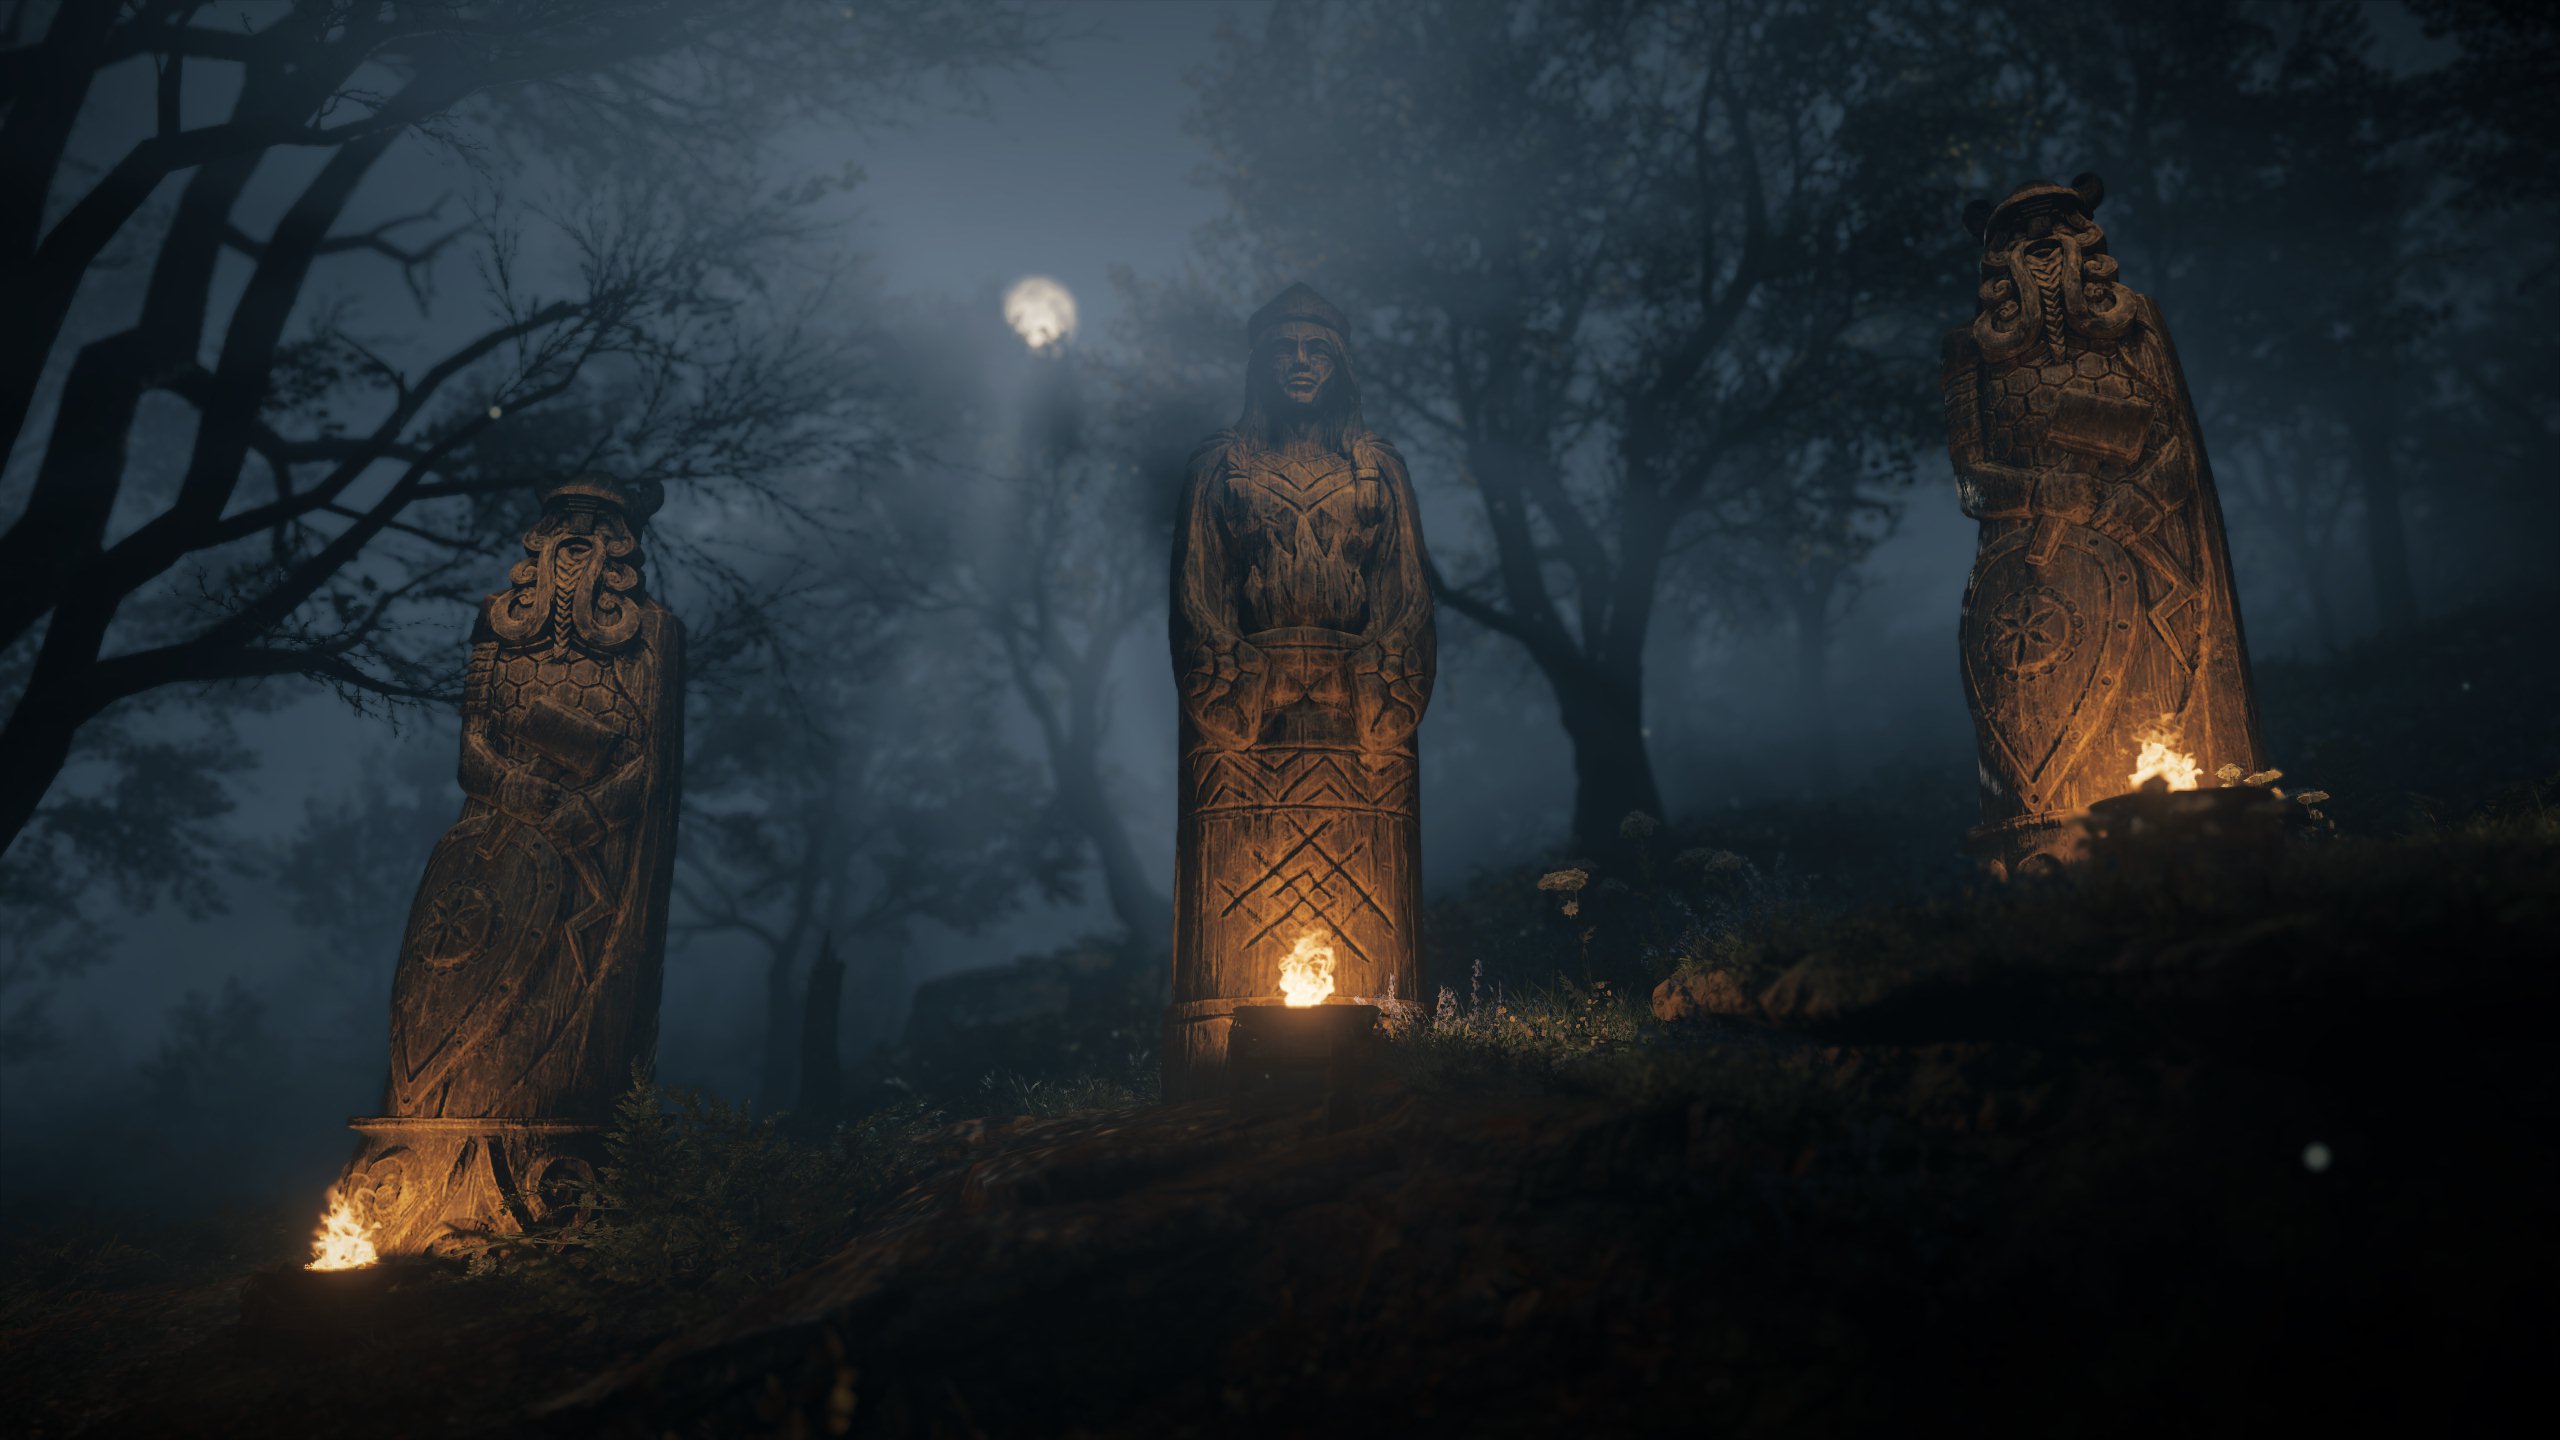 General 2560x1440 Assassin's Creed: Valhalla statue Norse mythology night screen shot video games